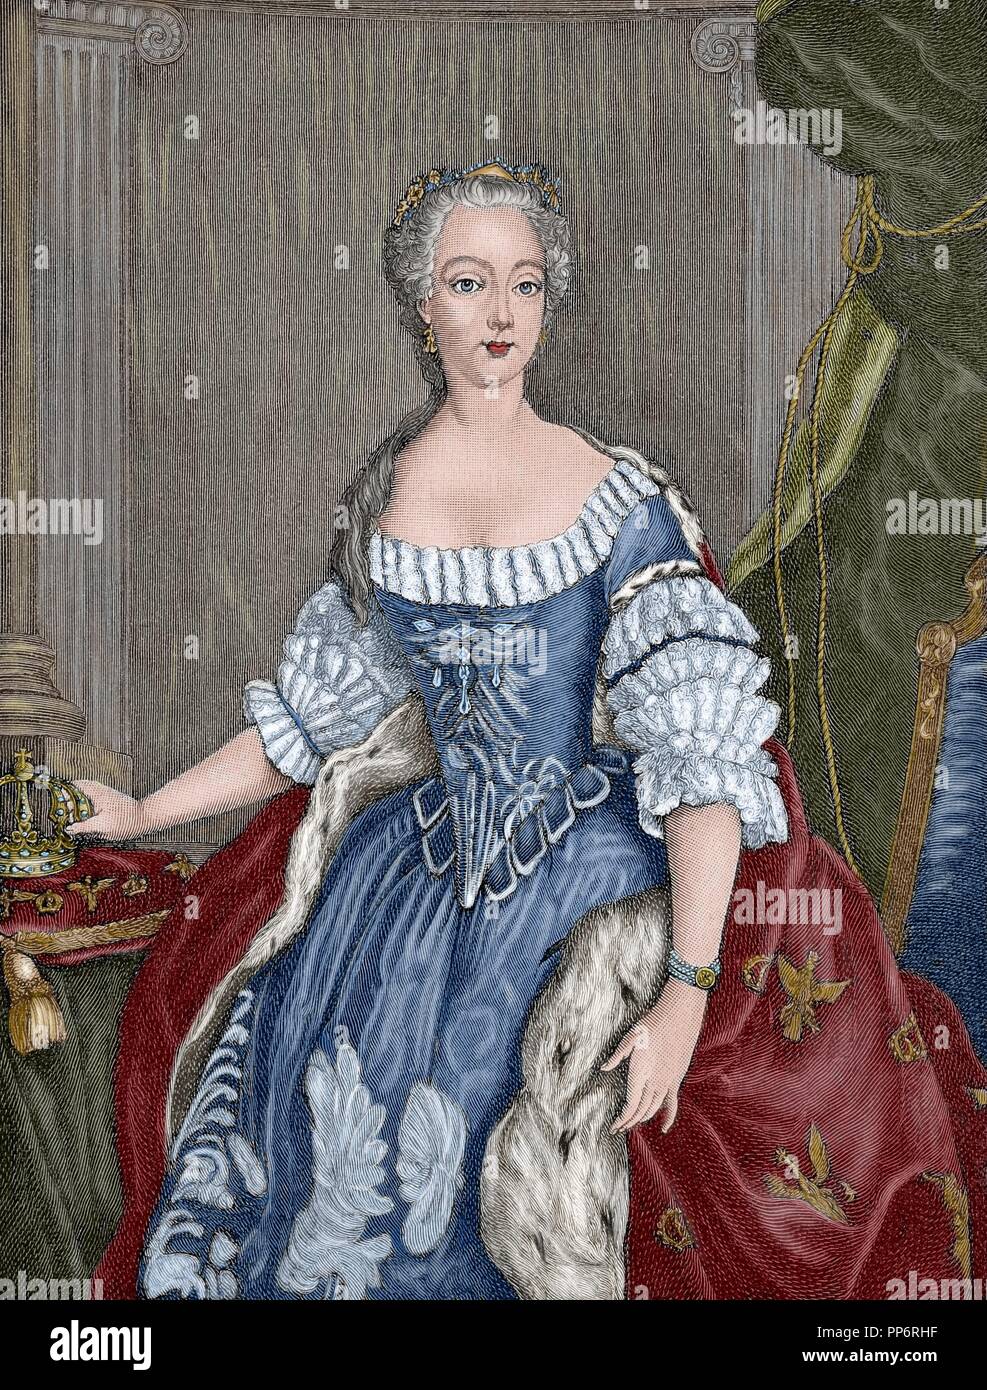 Elisabeth Christine of Brunswick-Wolfenbuttel-Bevern (1715-1797). Queen consort of Prussia, wife of King Frederick II. Colored engraving. Stock Photo